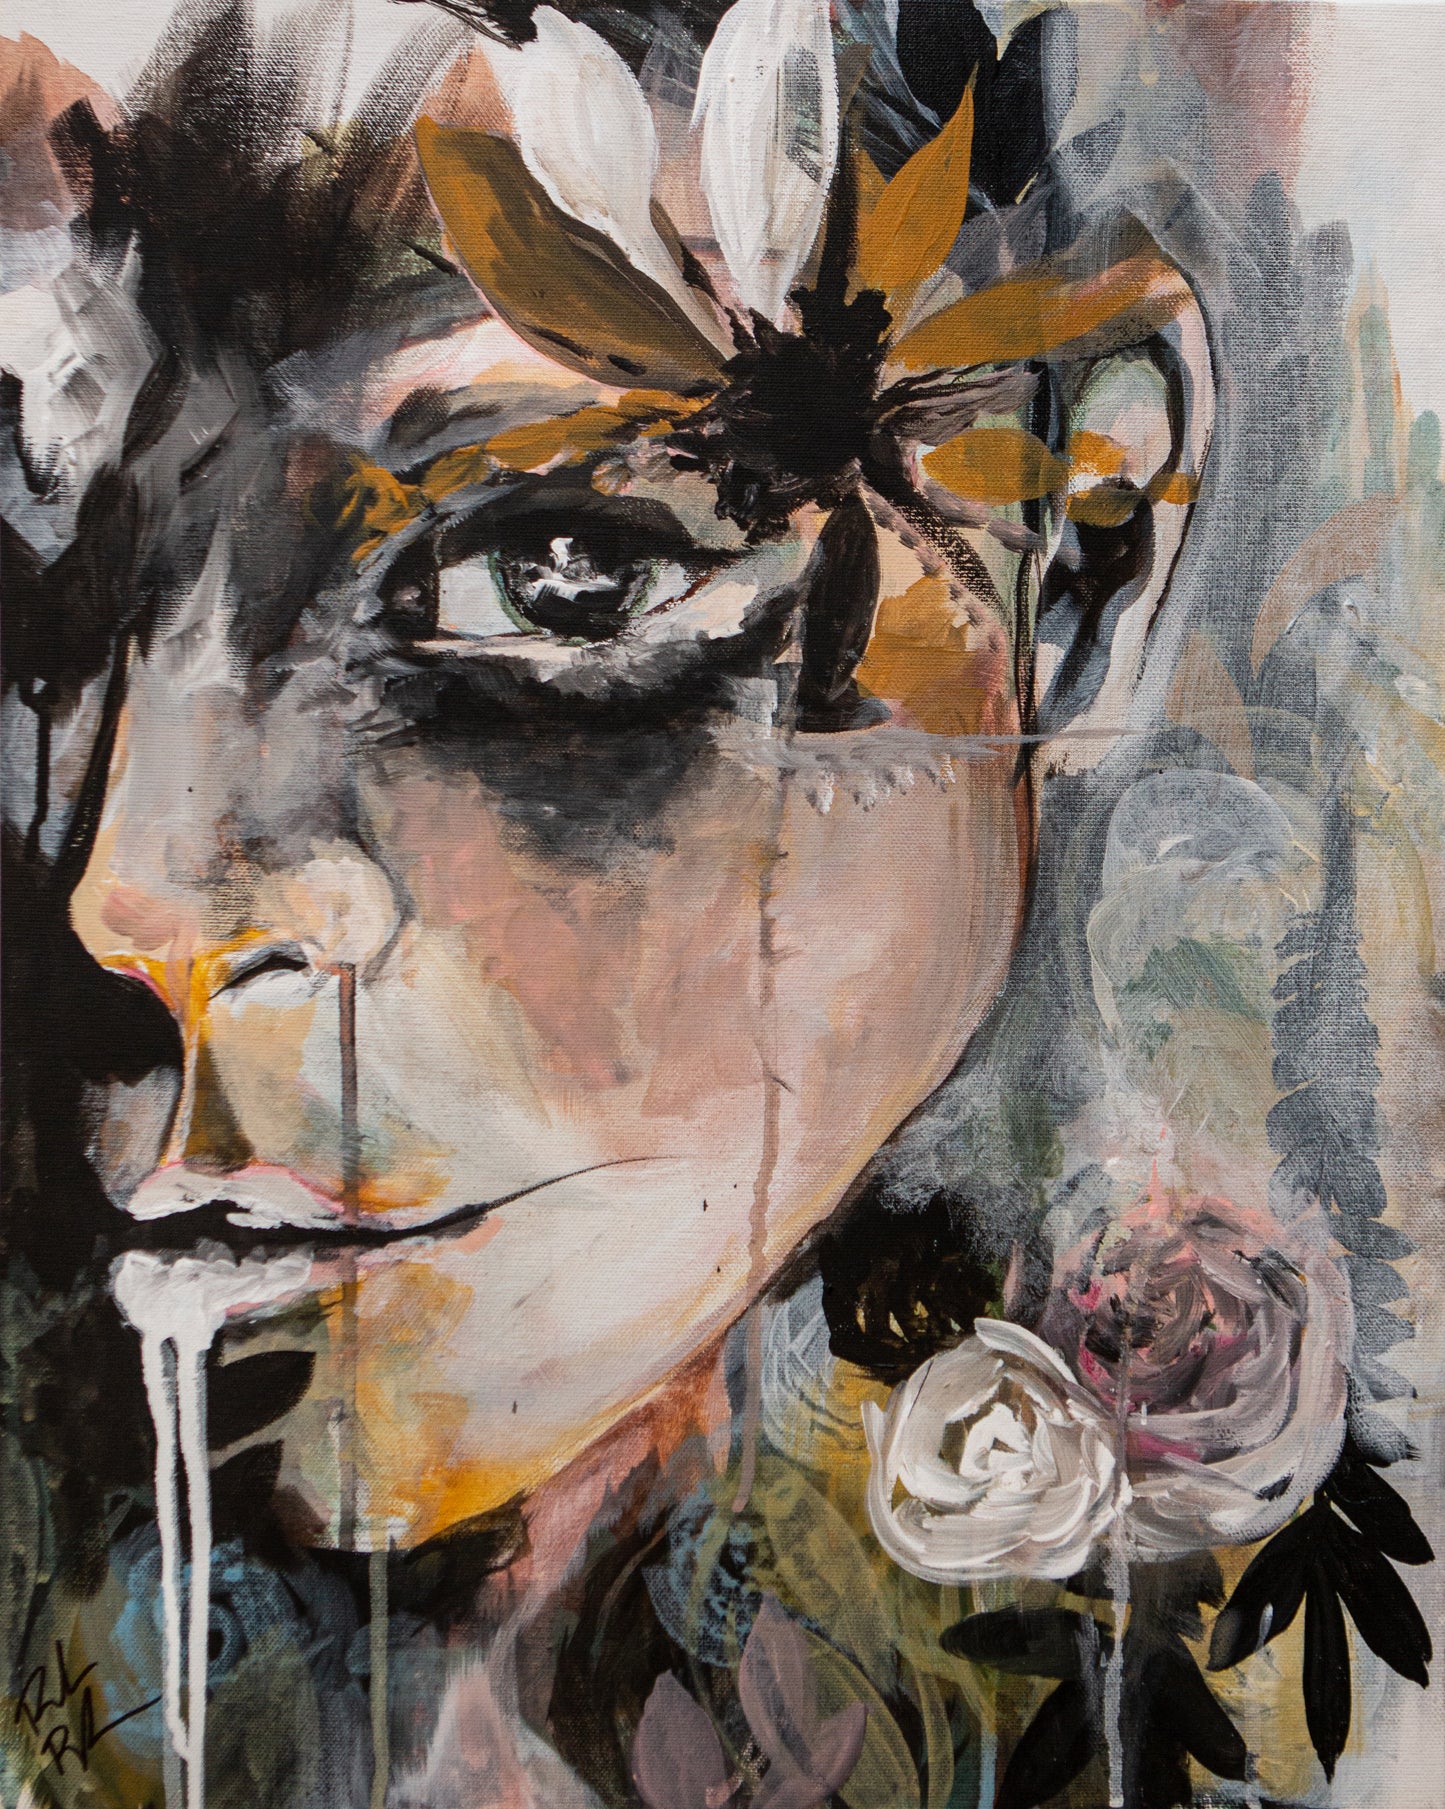 The layered painitngs of Rikki Bobbi in watercolor and acrylic mixed media